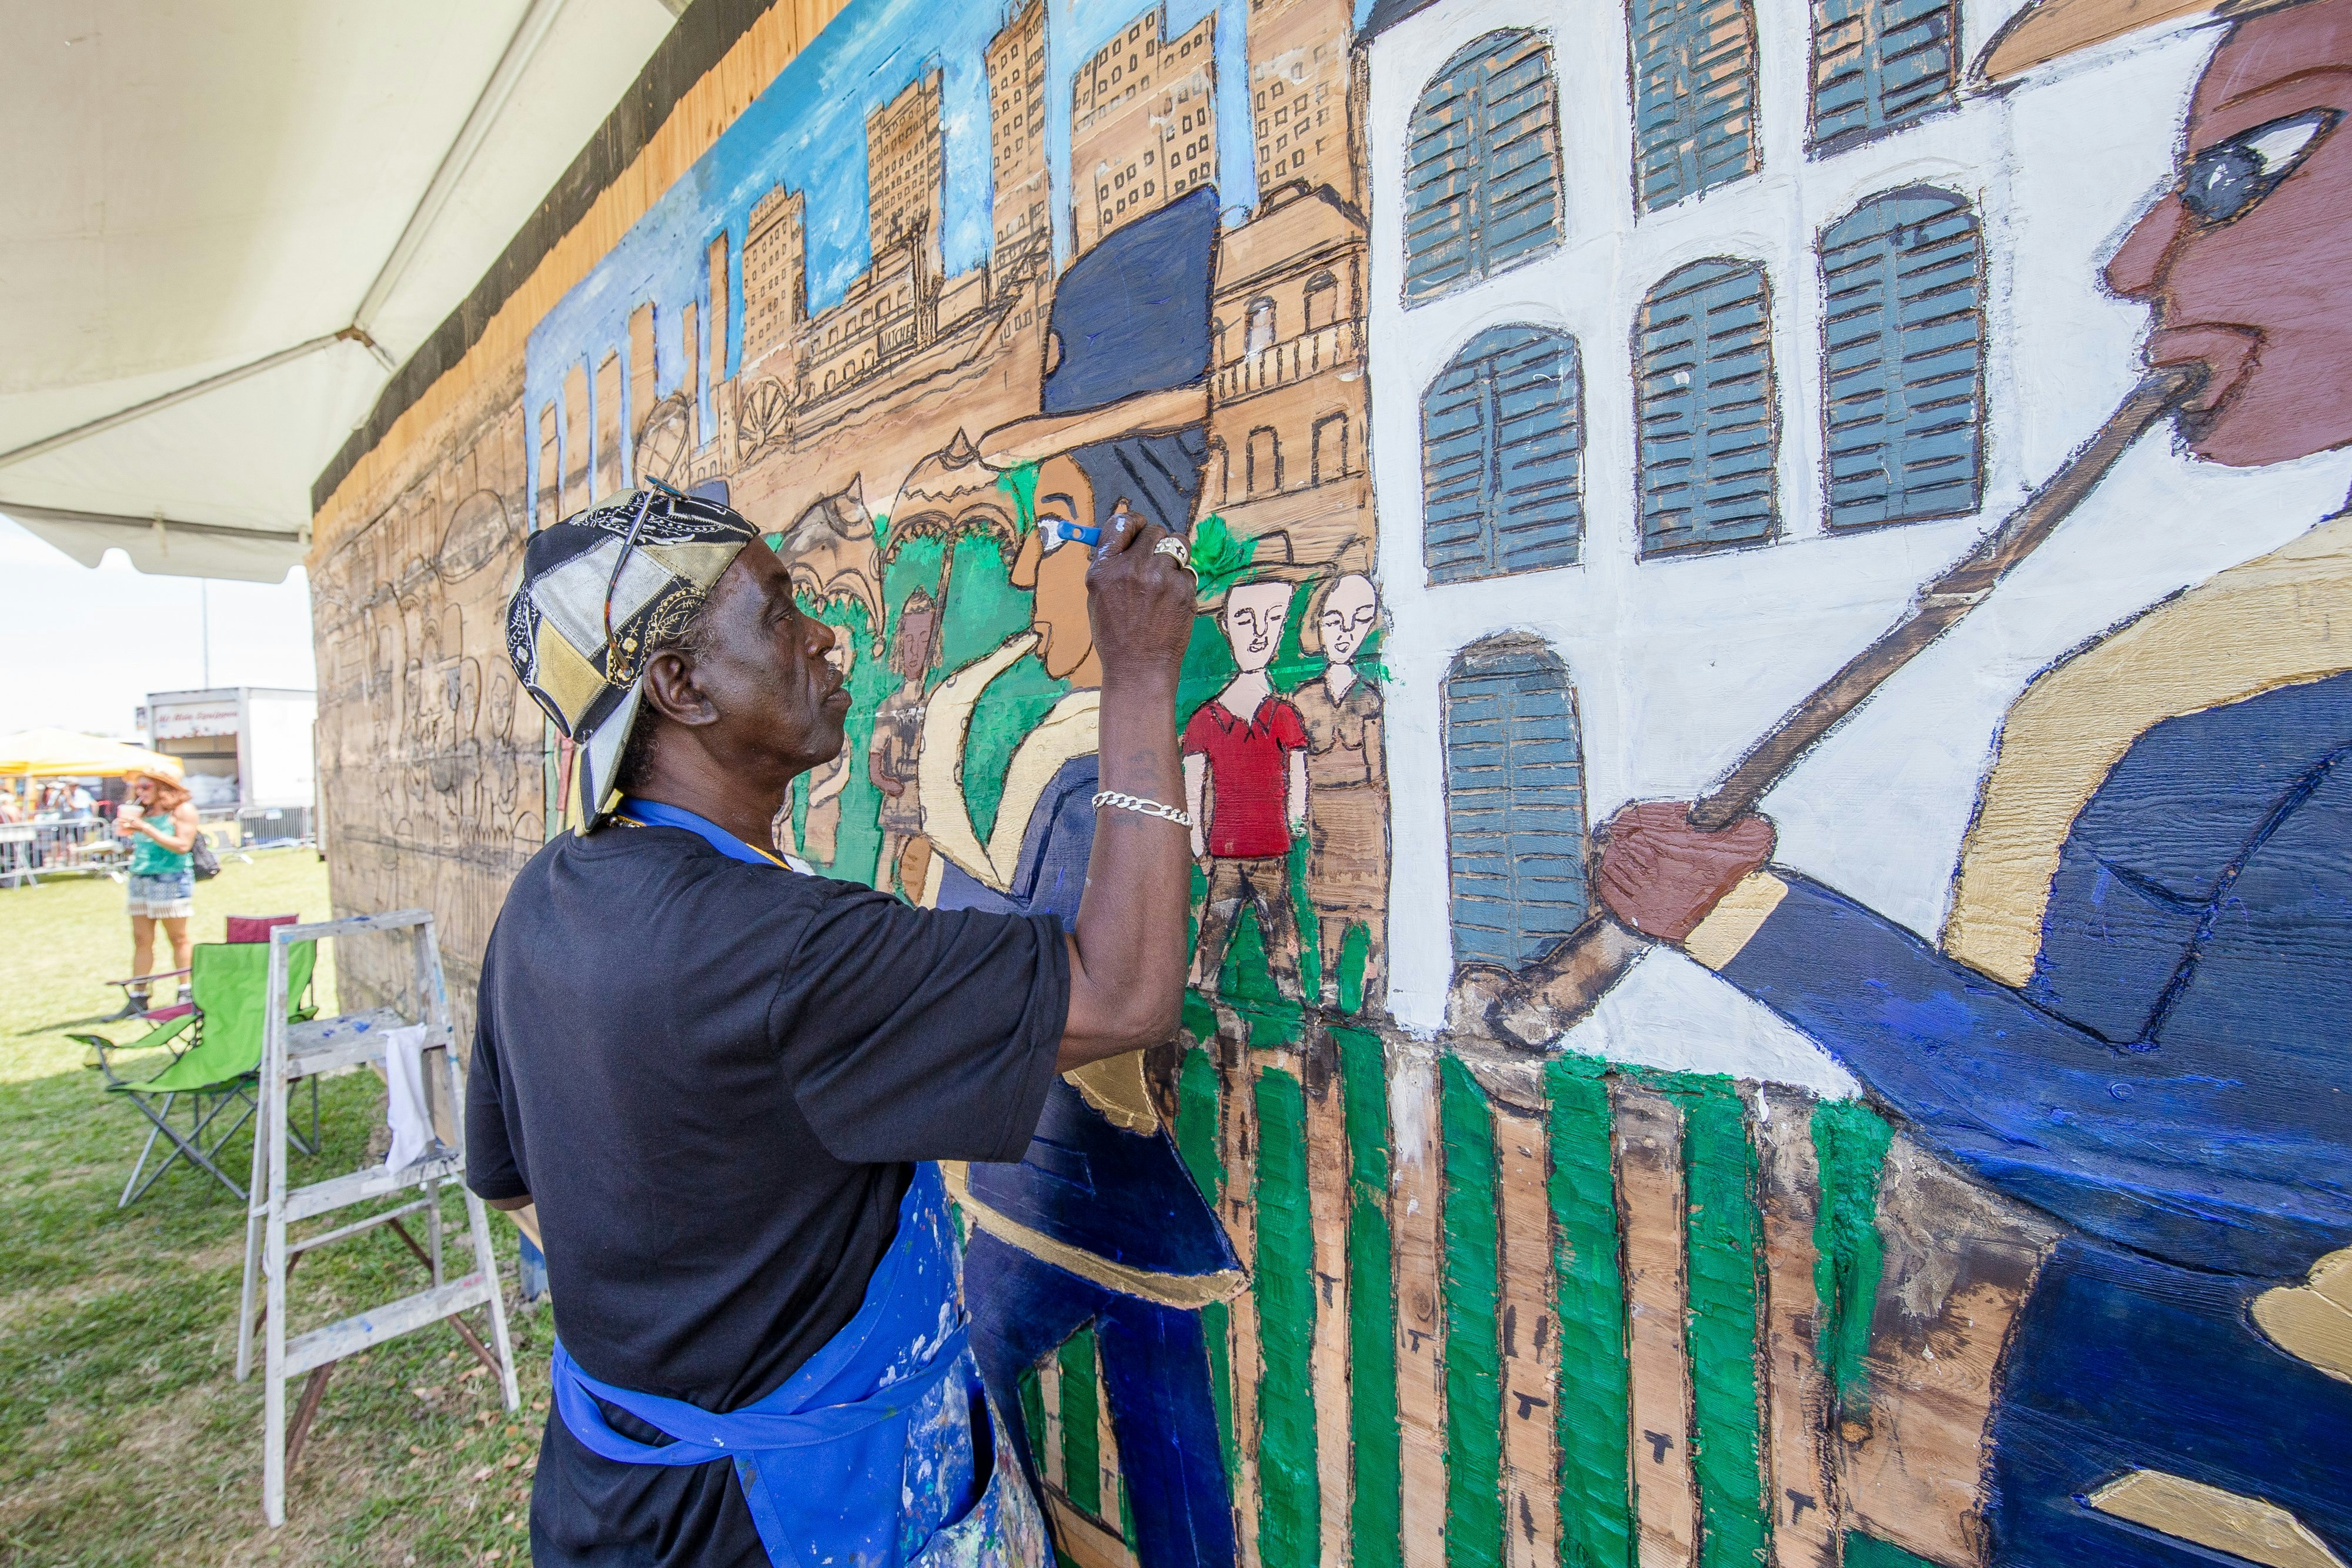 NEW ORLEANS, LA - APRIL 28: Artist Charles Gillam works on a wood carving at the New Orleans Jazz & Heritage Festival at the Fair Grounds Race Course on April 28, 2018 in New Orleans, Louisiana.  (Photo by Josh Brasted/WireImage)